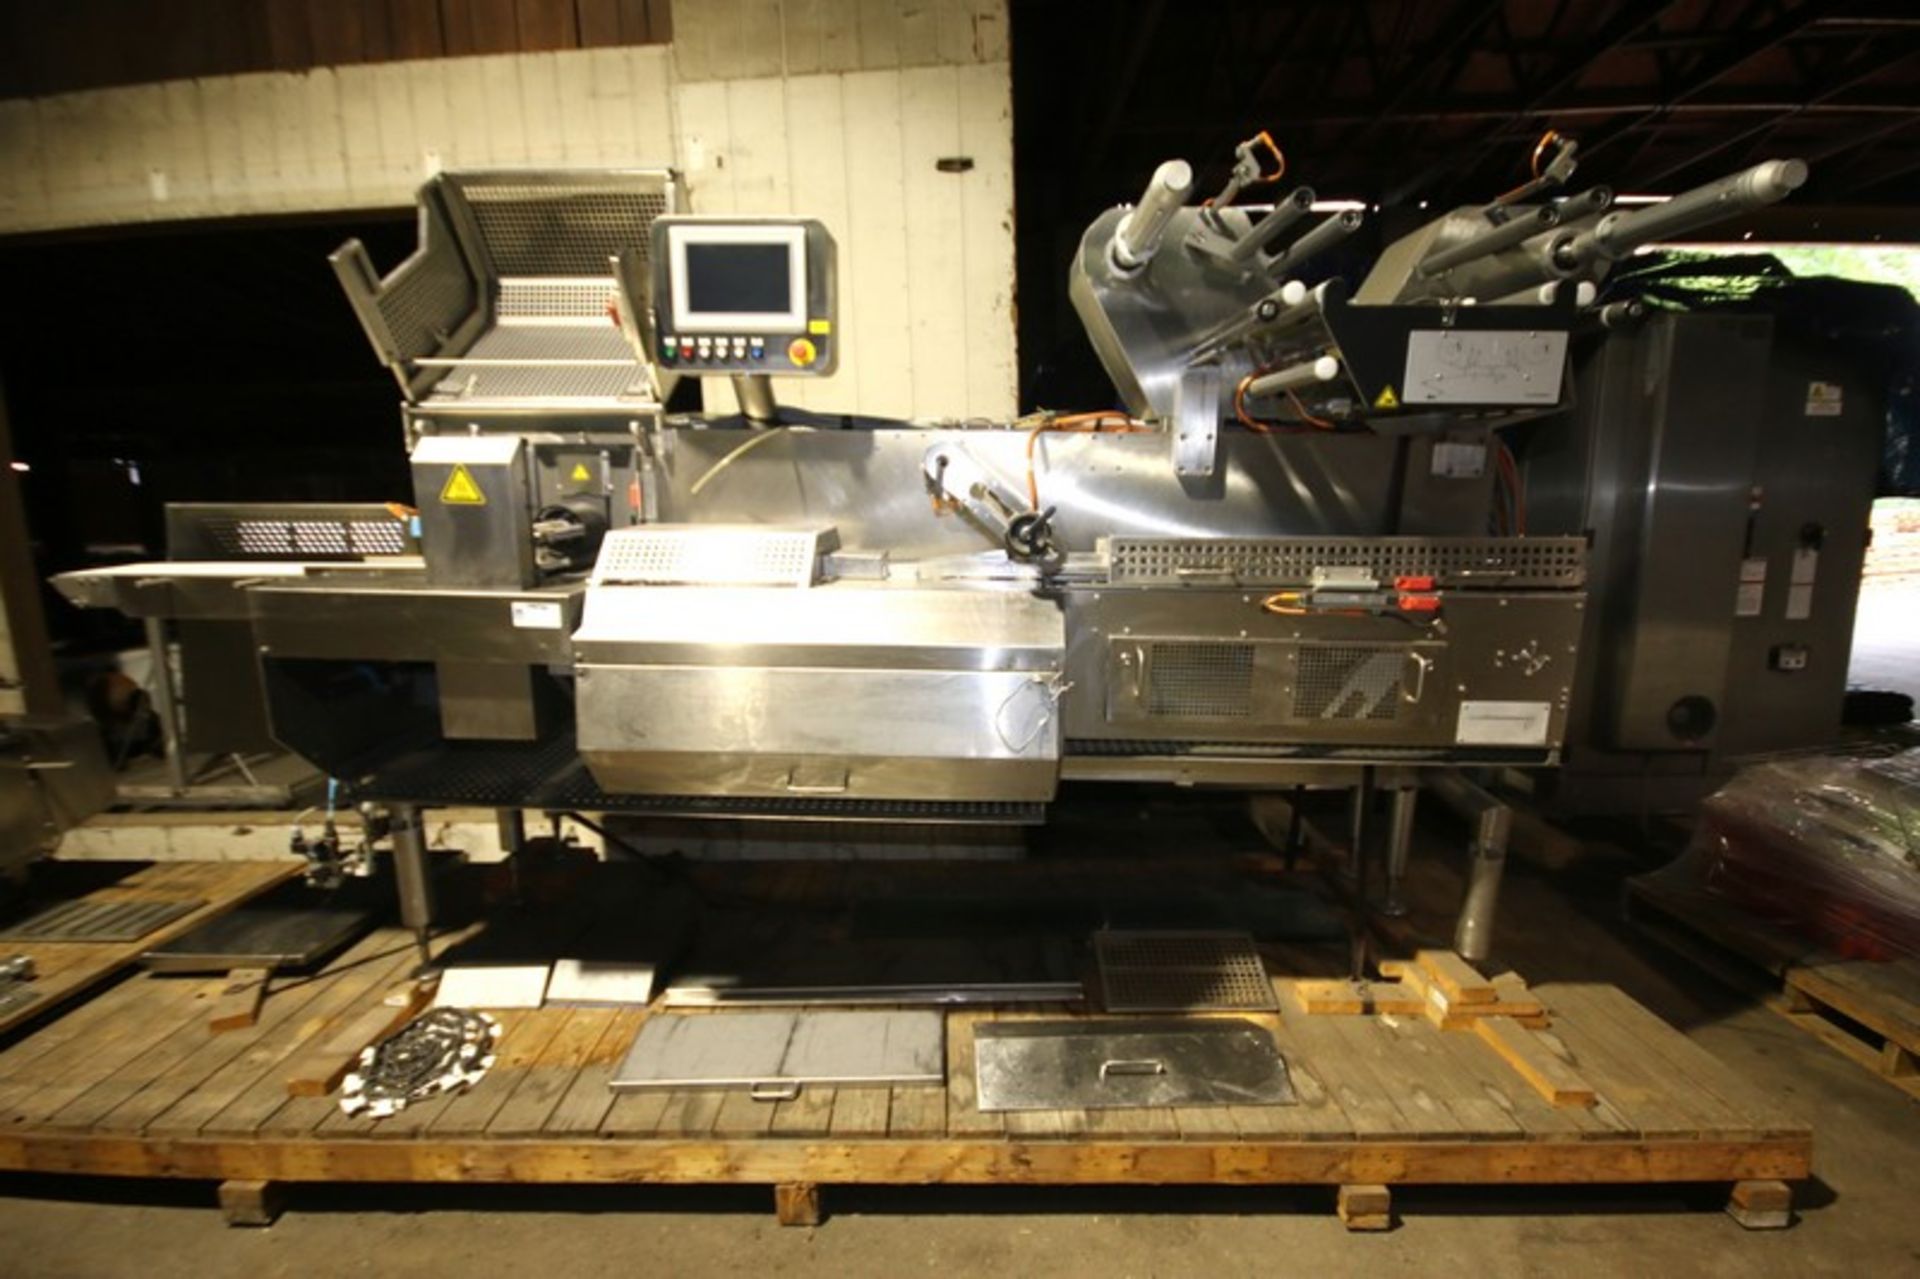 2018 CT Pack Horizontal Flow Wrapper Type Mach 120 SX. SN N76_OTNESTLETUL1, with 8" W Conveyor, - Image 2 of 20